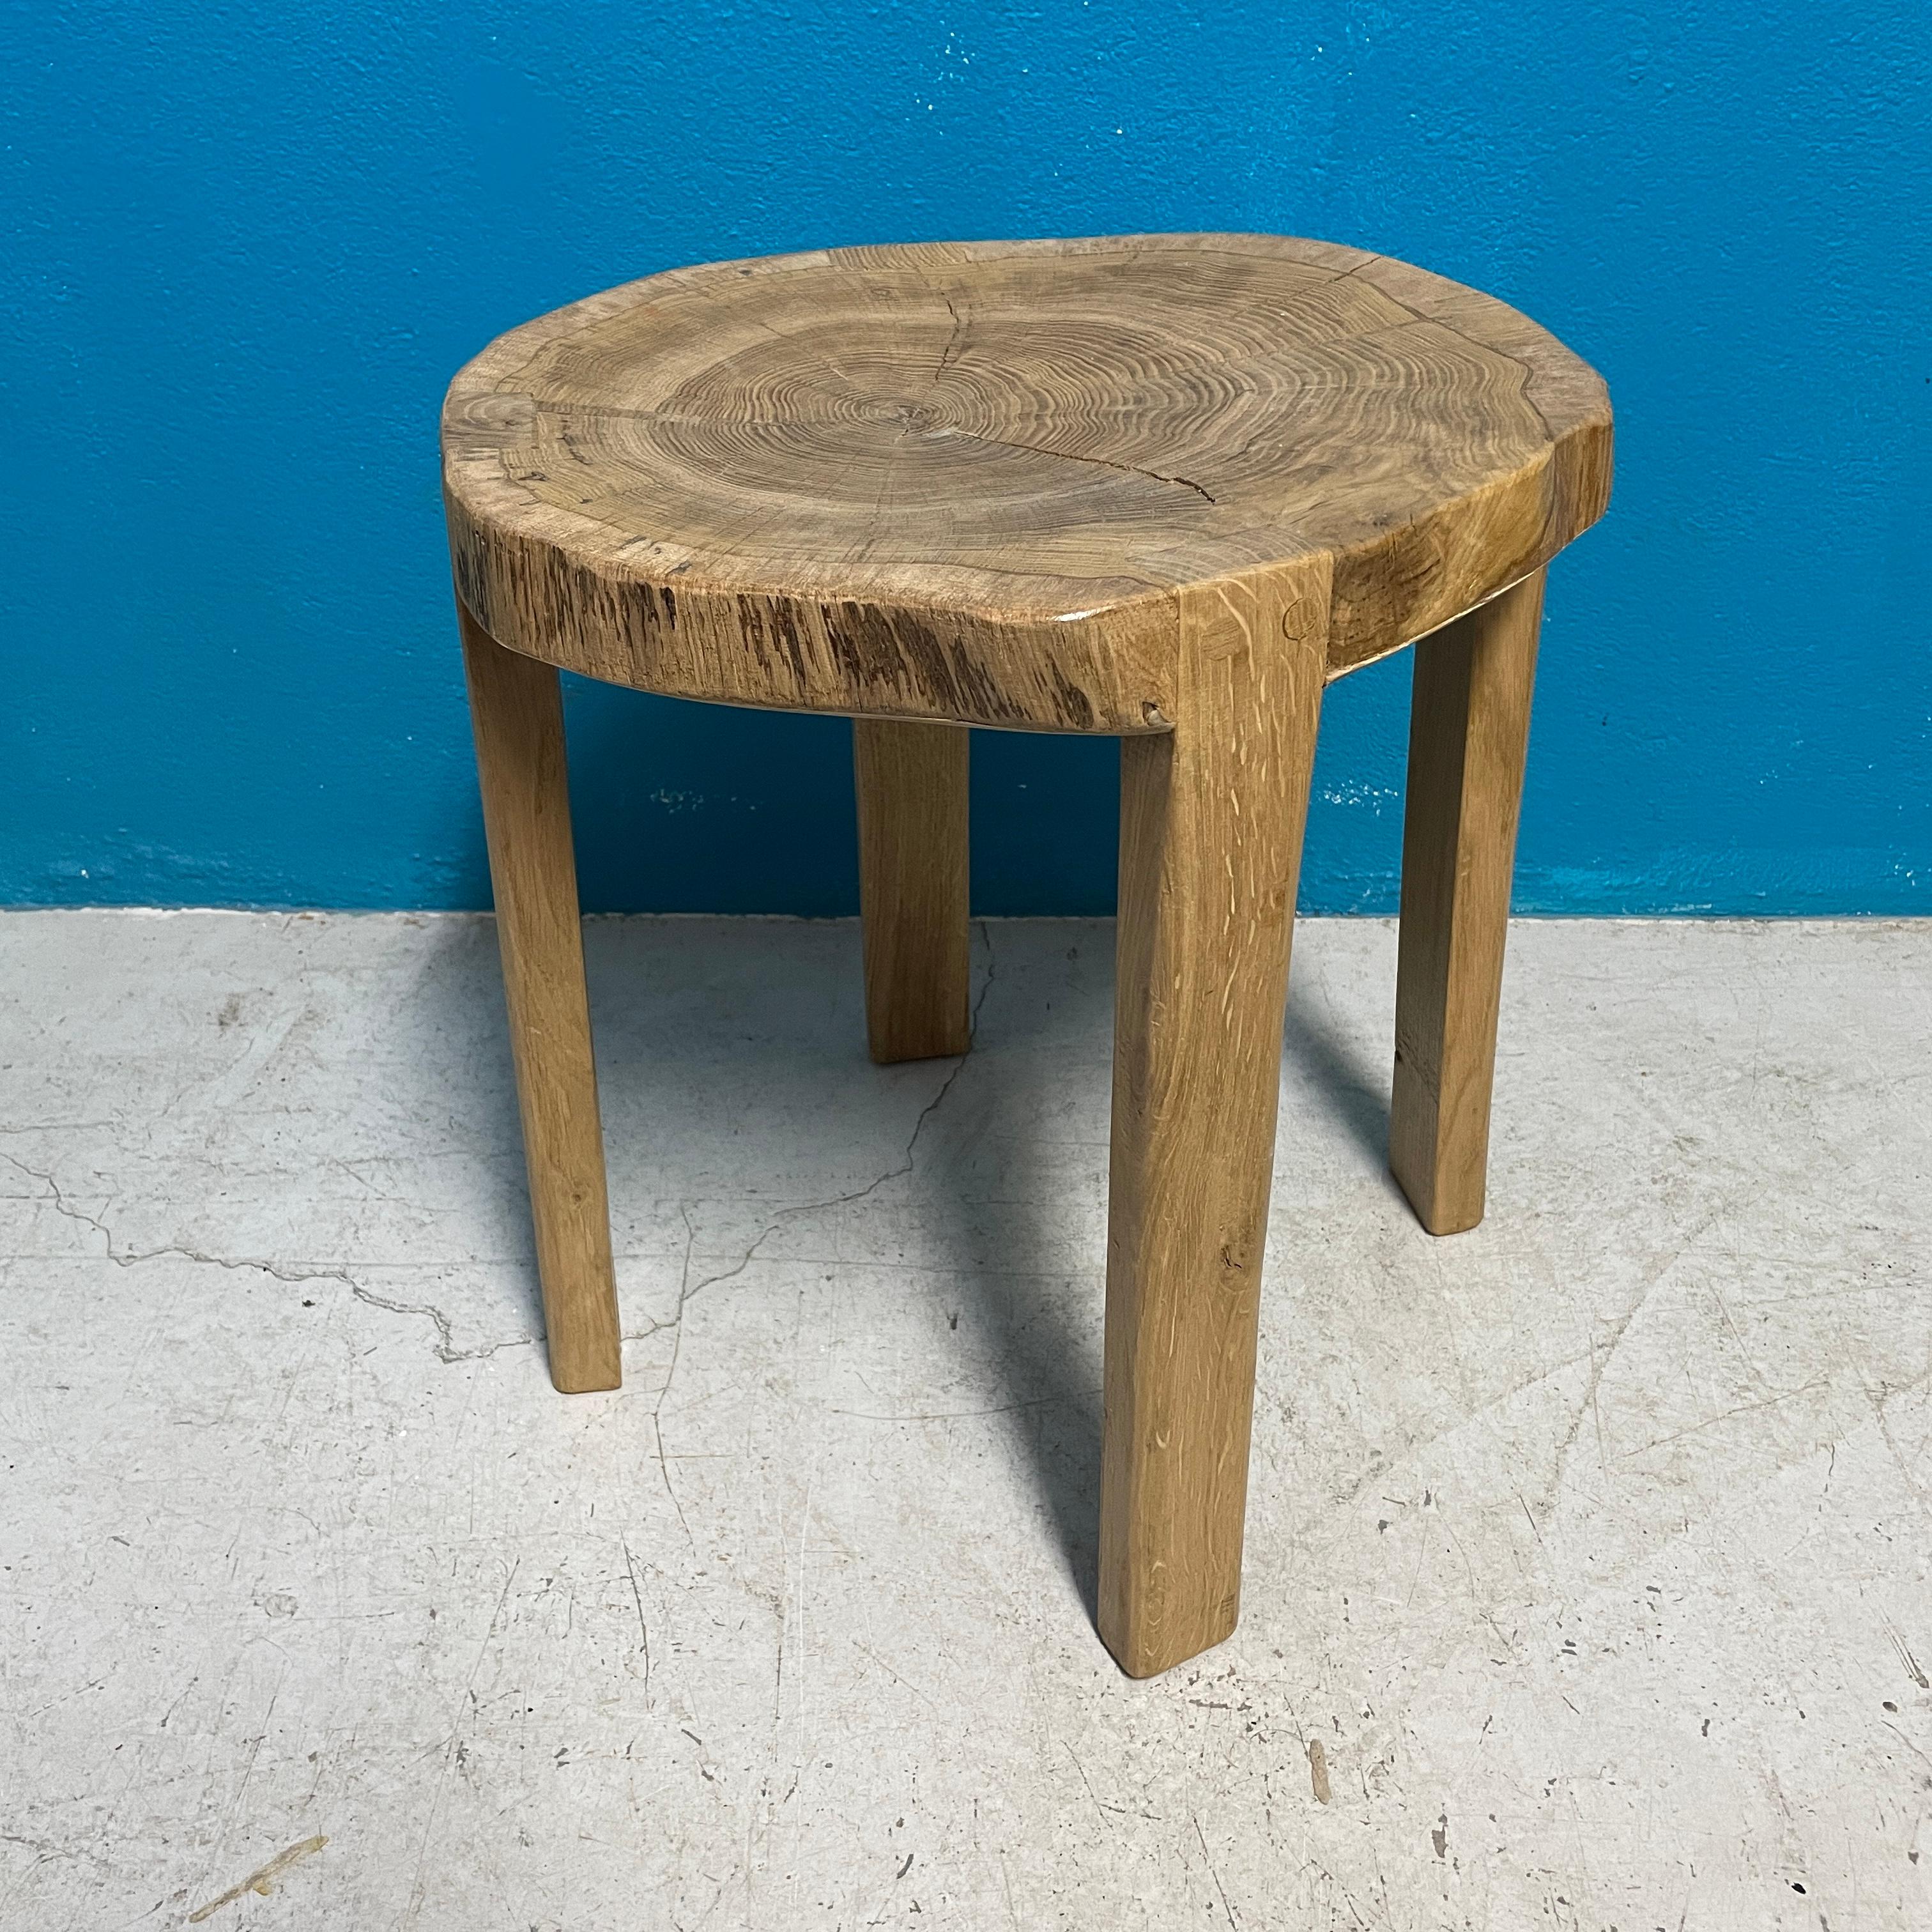 a Unique and beautiful stool that is made of solid oak-wood. Also well suitable as a side table for example. Handcrafted in Finland.

Rough finishing brings out the natural elements of oak-wood beautifully.

- Height 45cm / 17.17in


